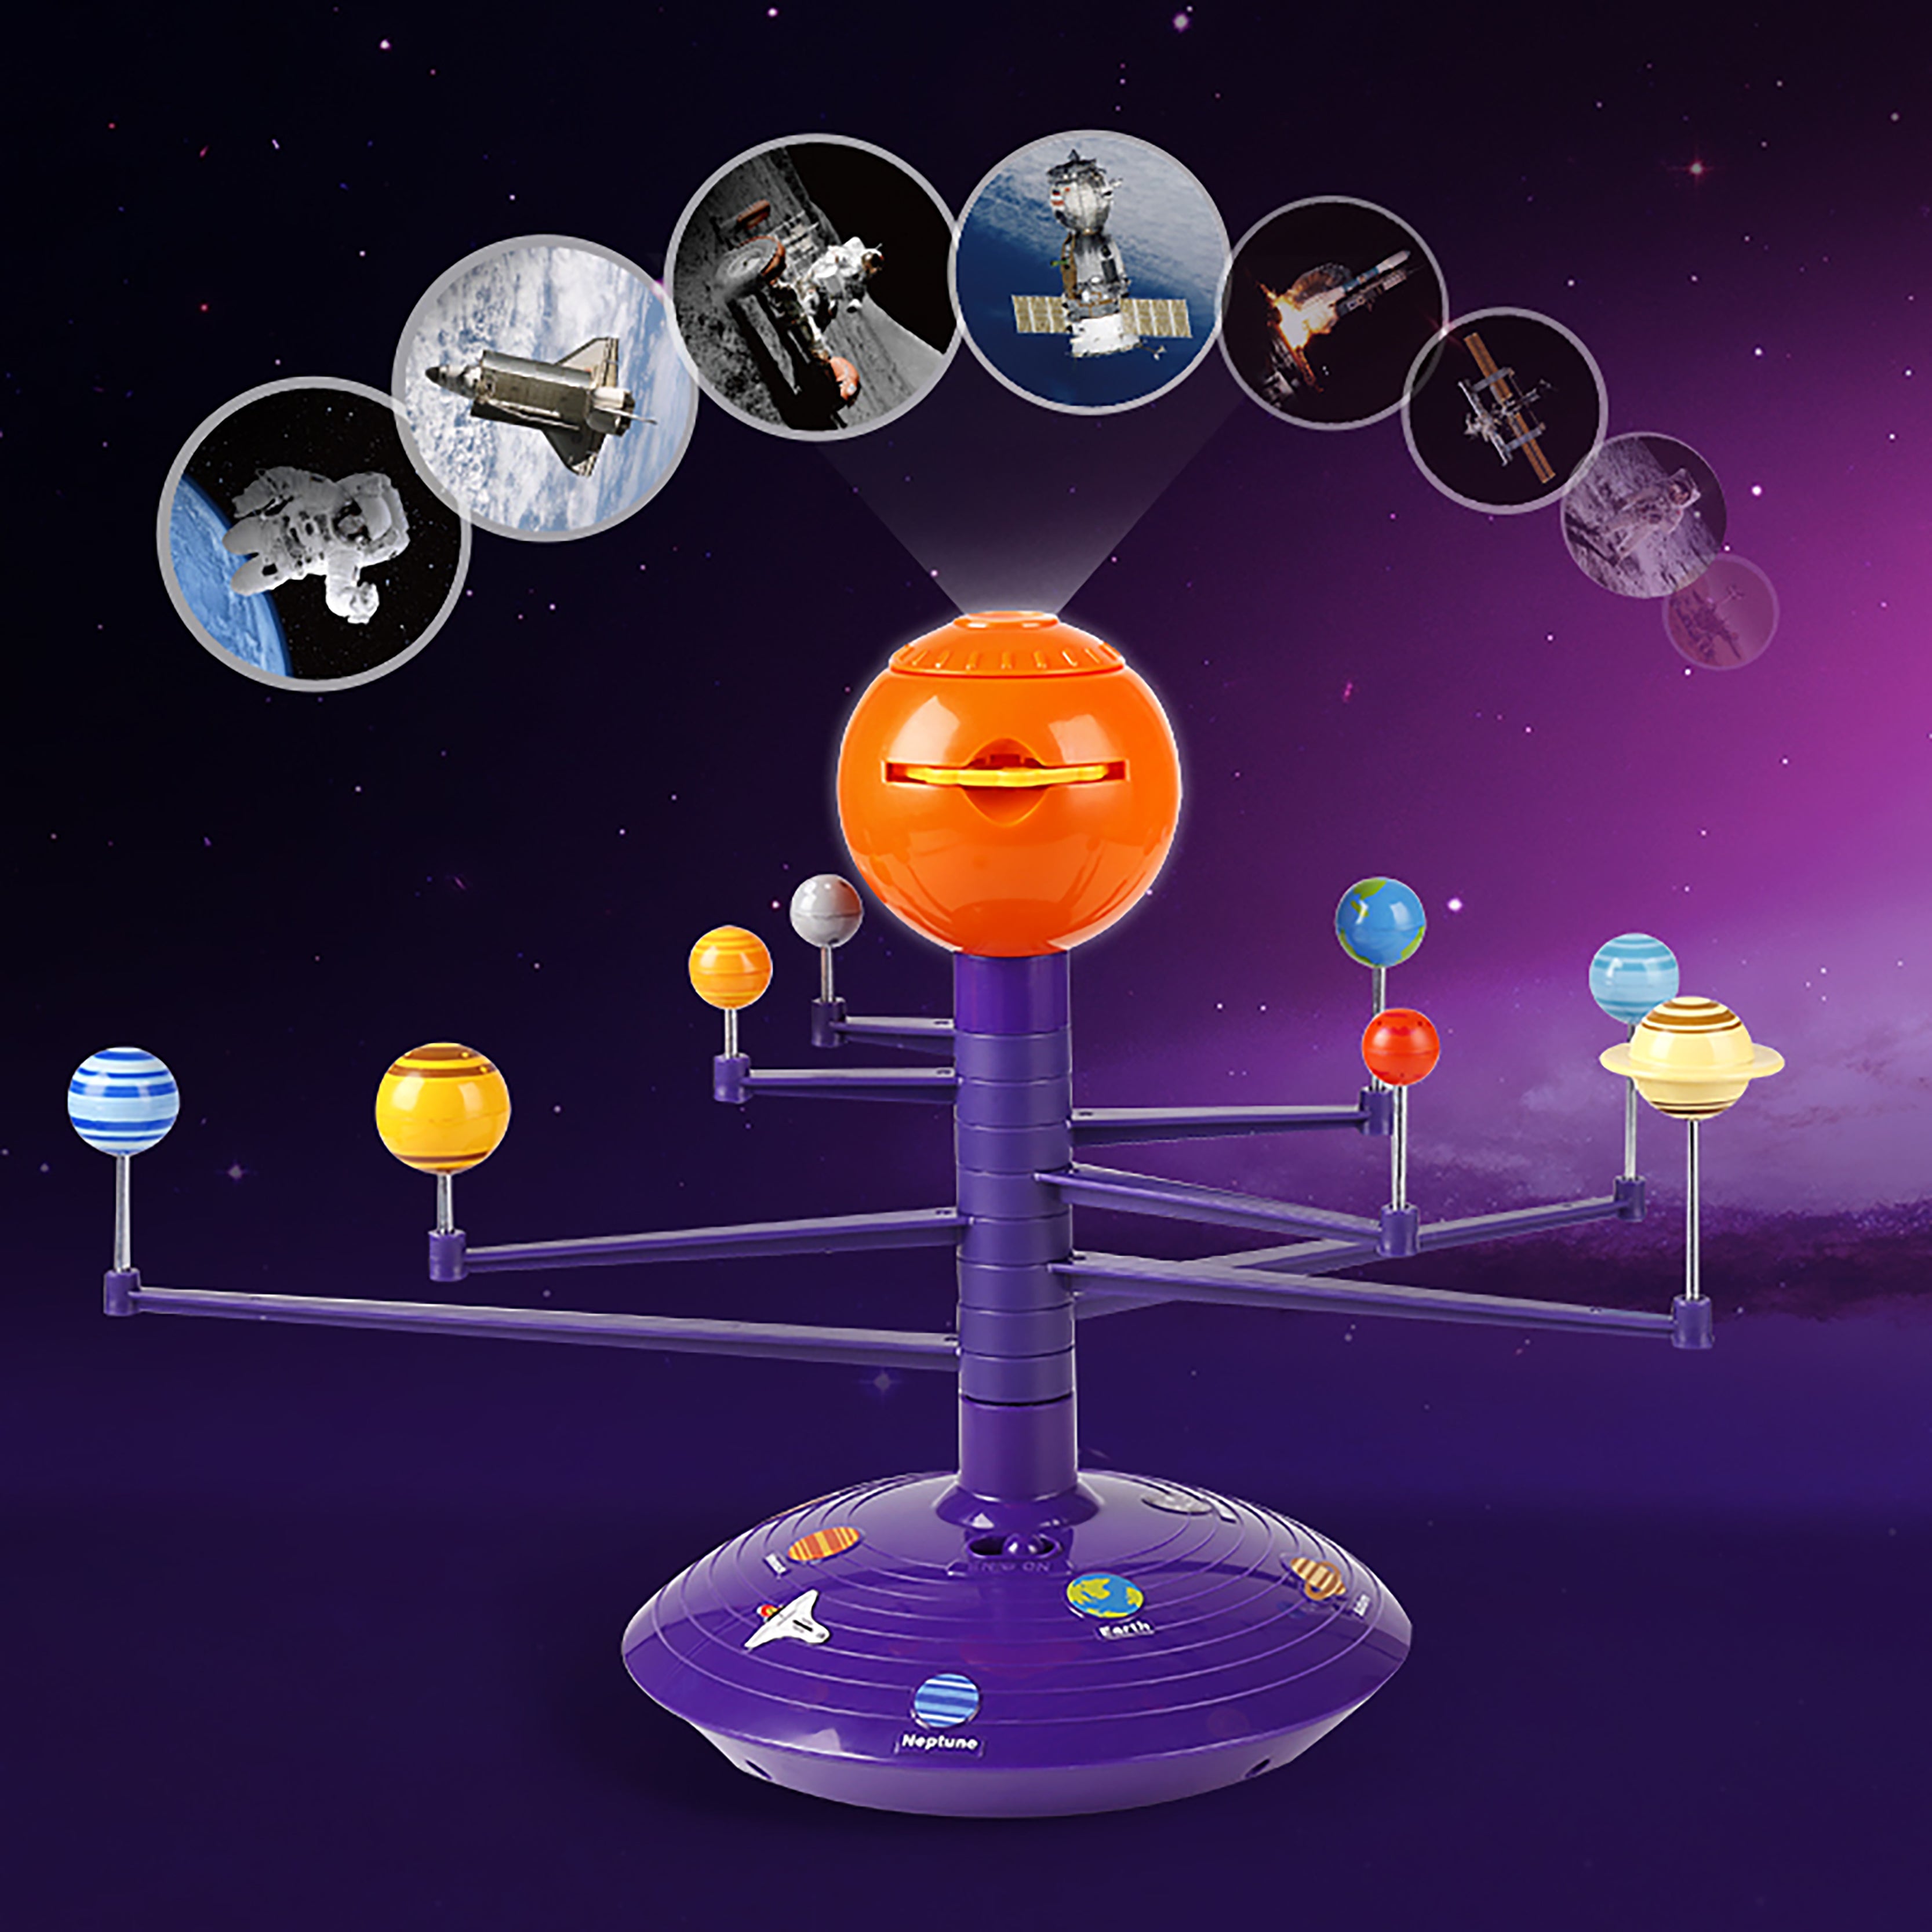 In the realistic planetarium, eight moving planets orbit the sun. It impresses with voice output and provides exciting facts about the planets.